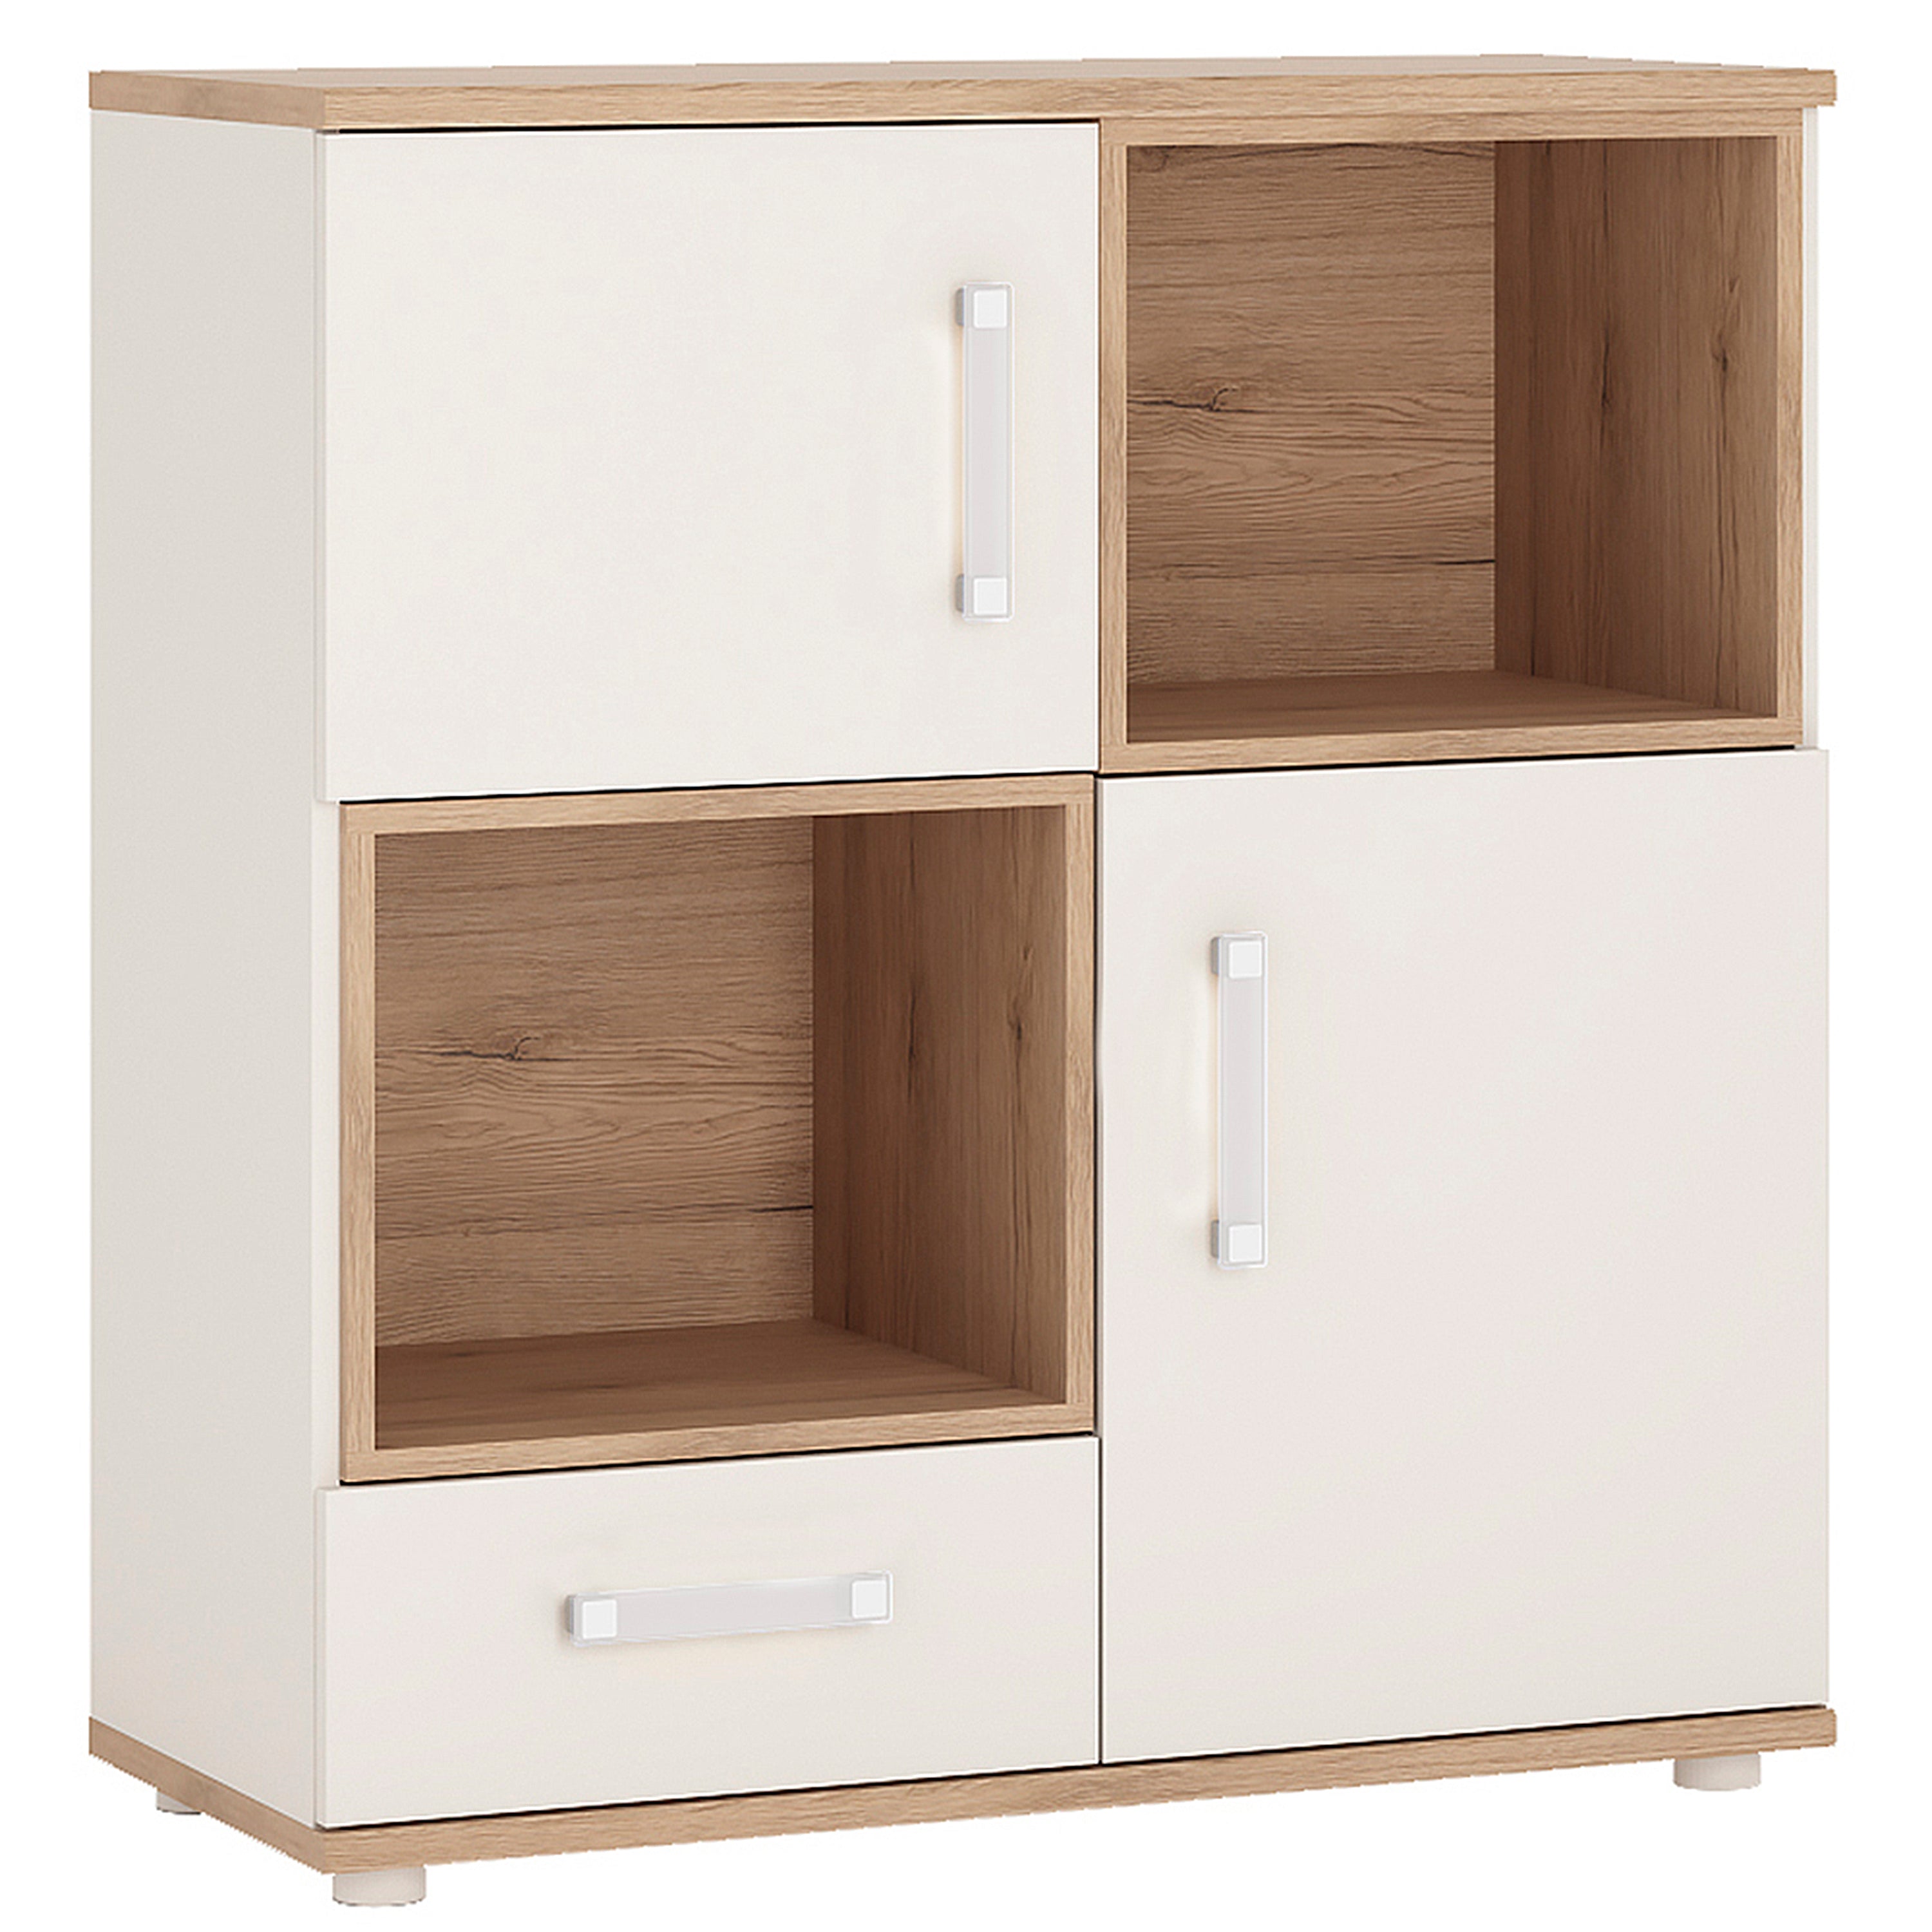 Image of 4KIDS 2 Door 1 Drawer Cupboard With 2 Shelves - Available In 4 Colours